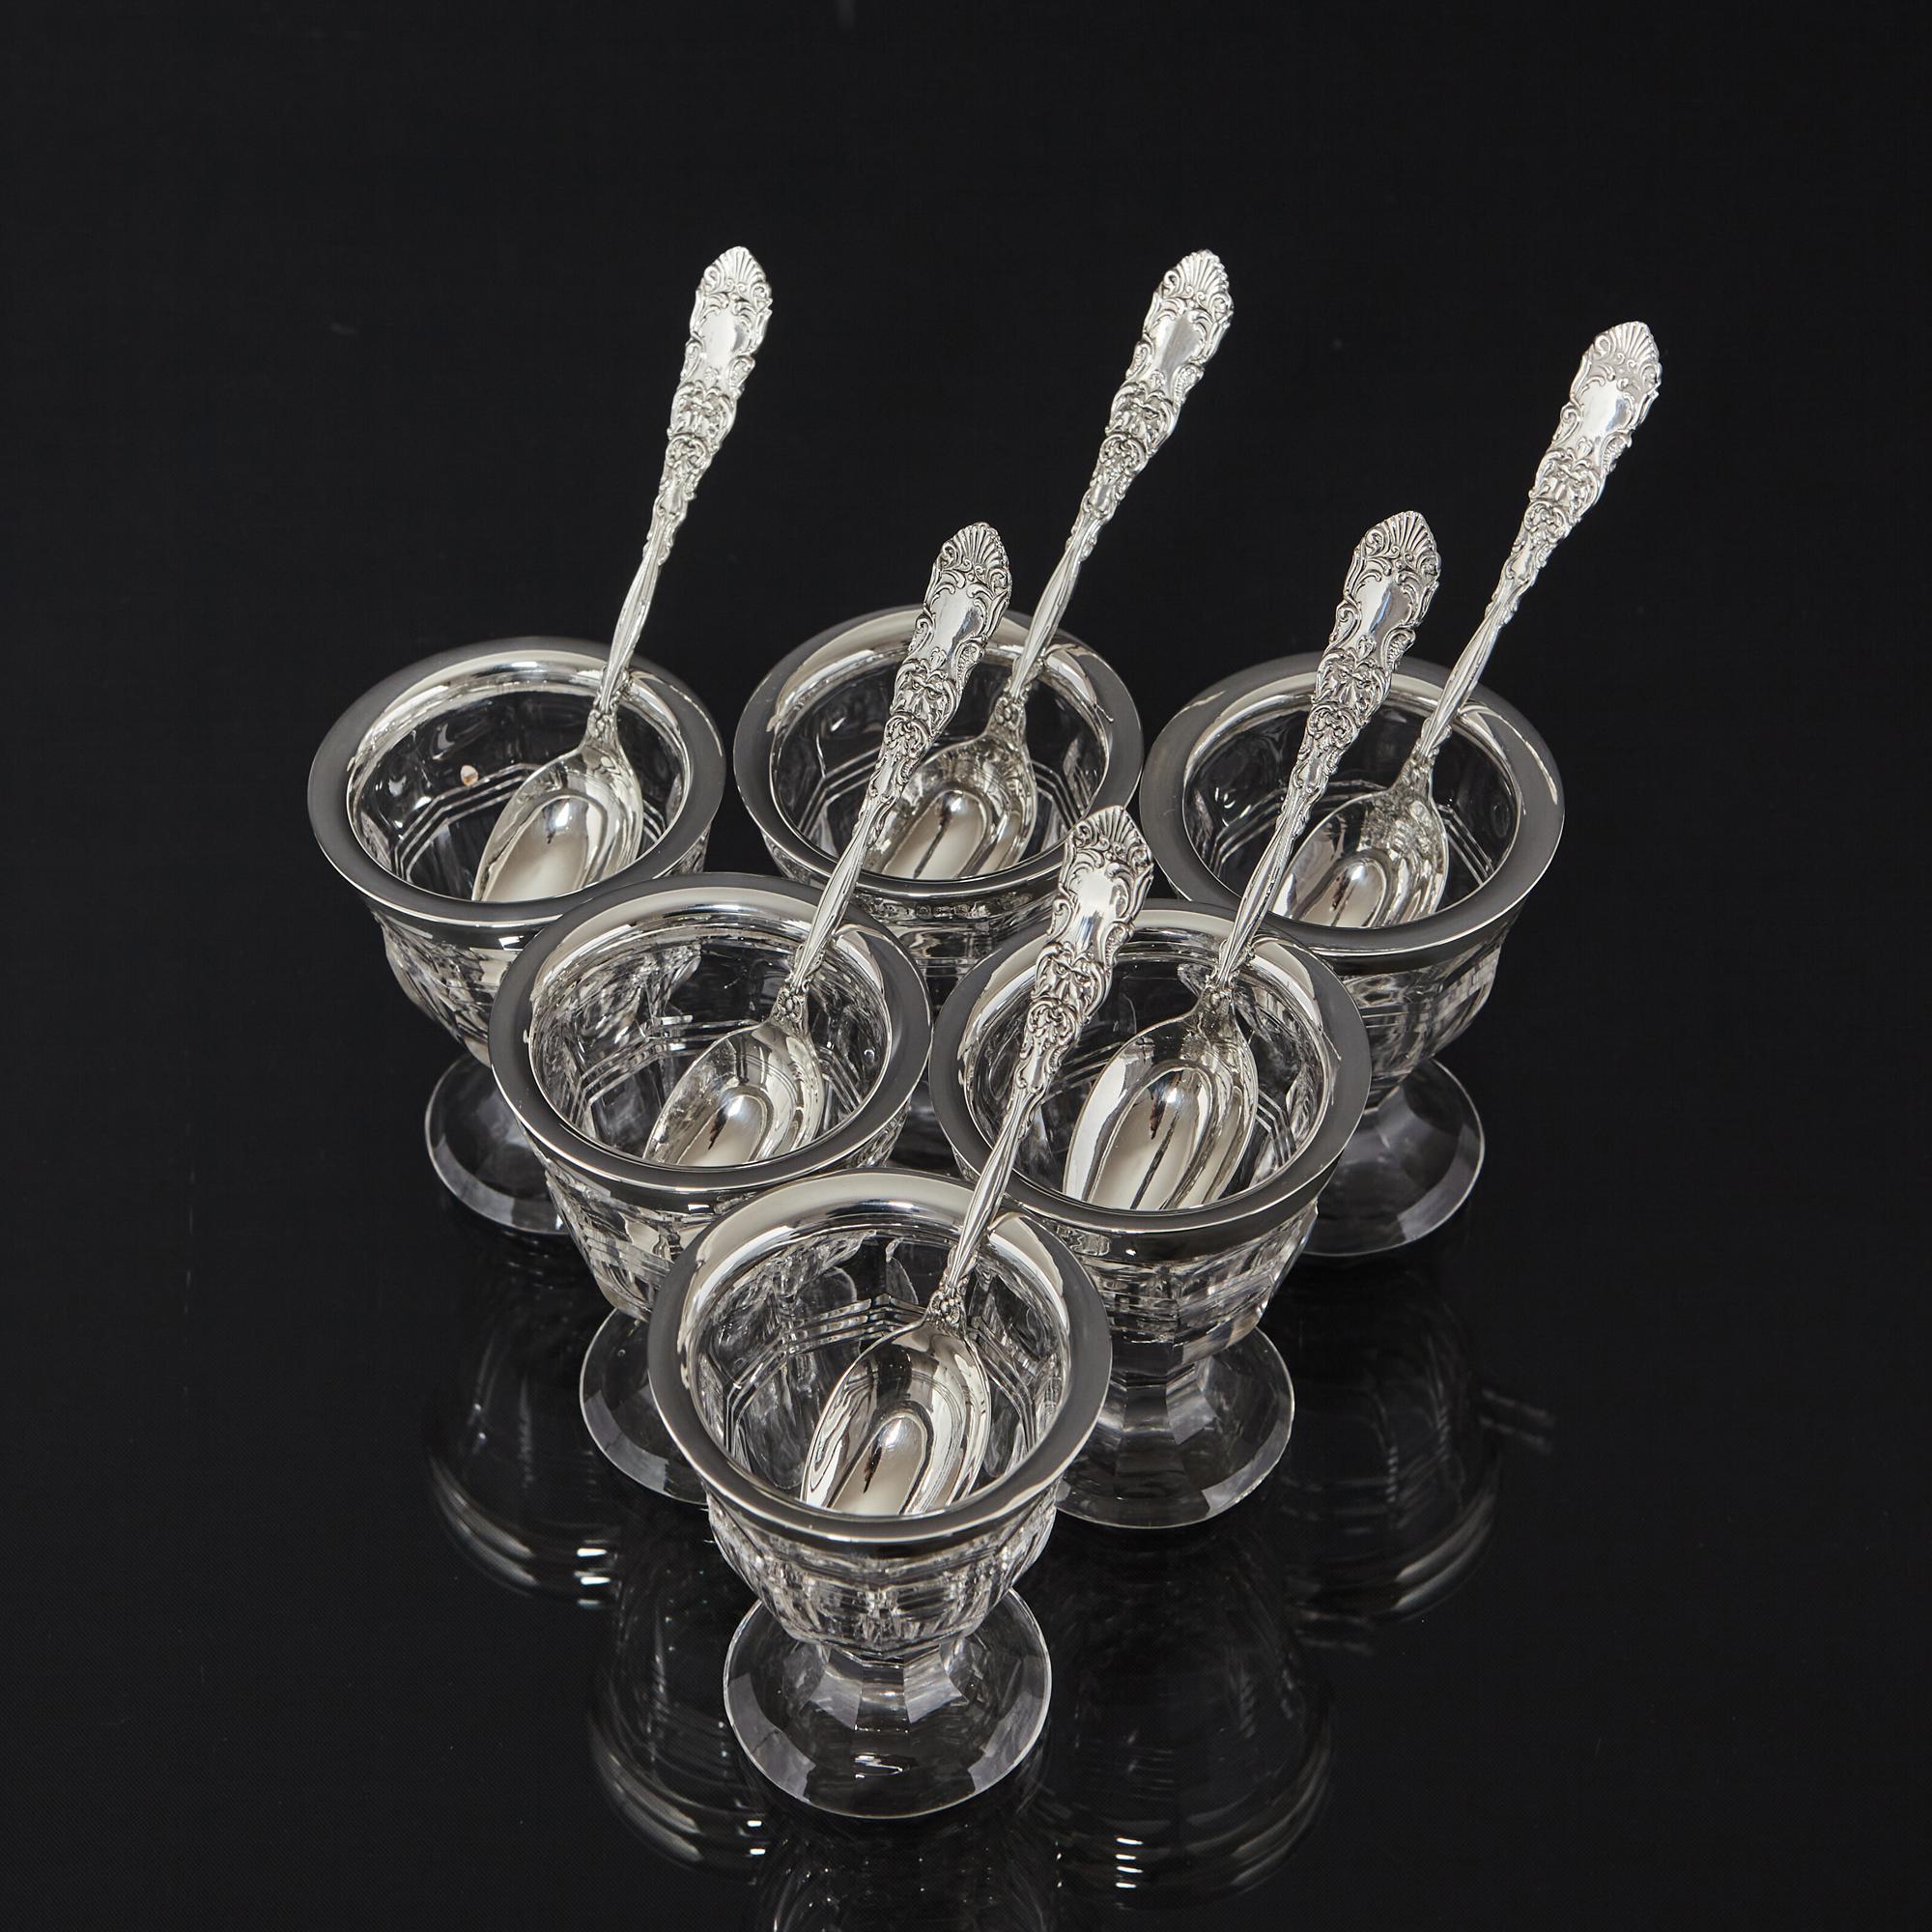 Quite a rare set of collected Edwardian cut glass egg cups with silver rims and a set of decorative spoons. The glass egg cups are cut with panels and feature a horizontal thread pattern around the bodies. The rims are sterling silver and the